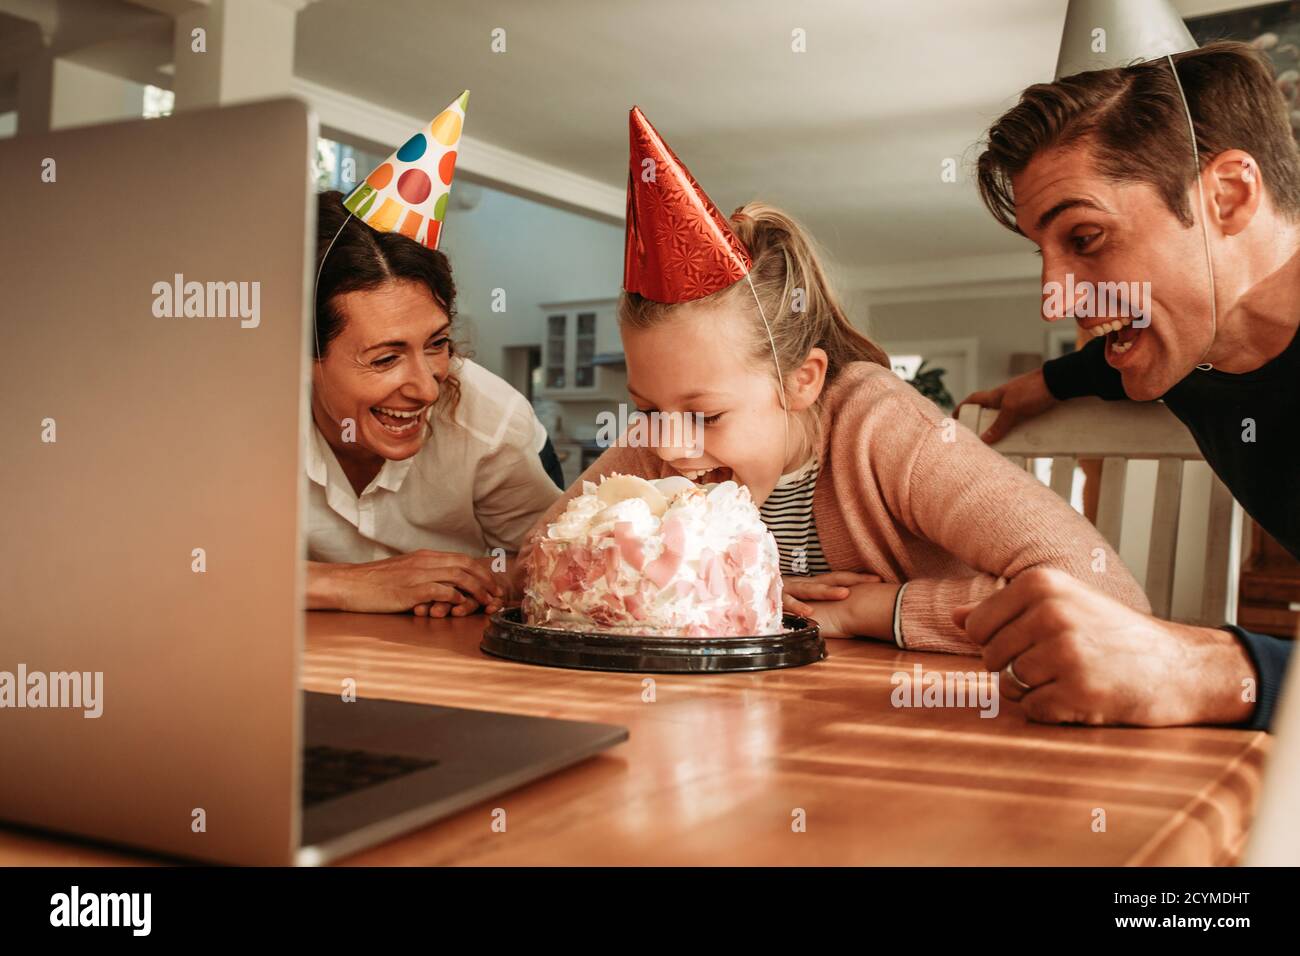 Girl cutting her birthday cake with her mouth with her parents smiling by. Family celebrating girl's at home during covid-19 quarantine. Stock Photo